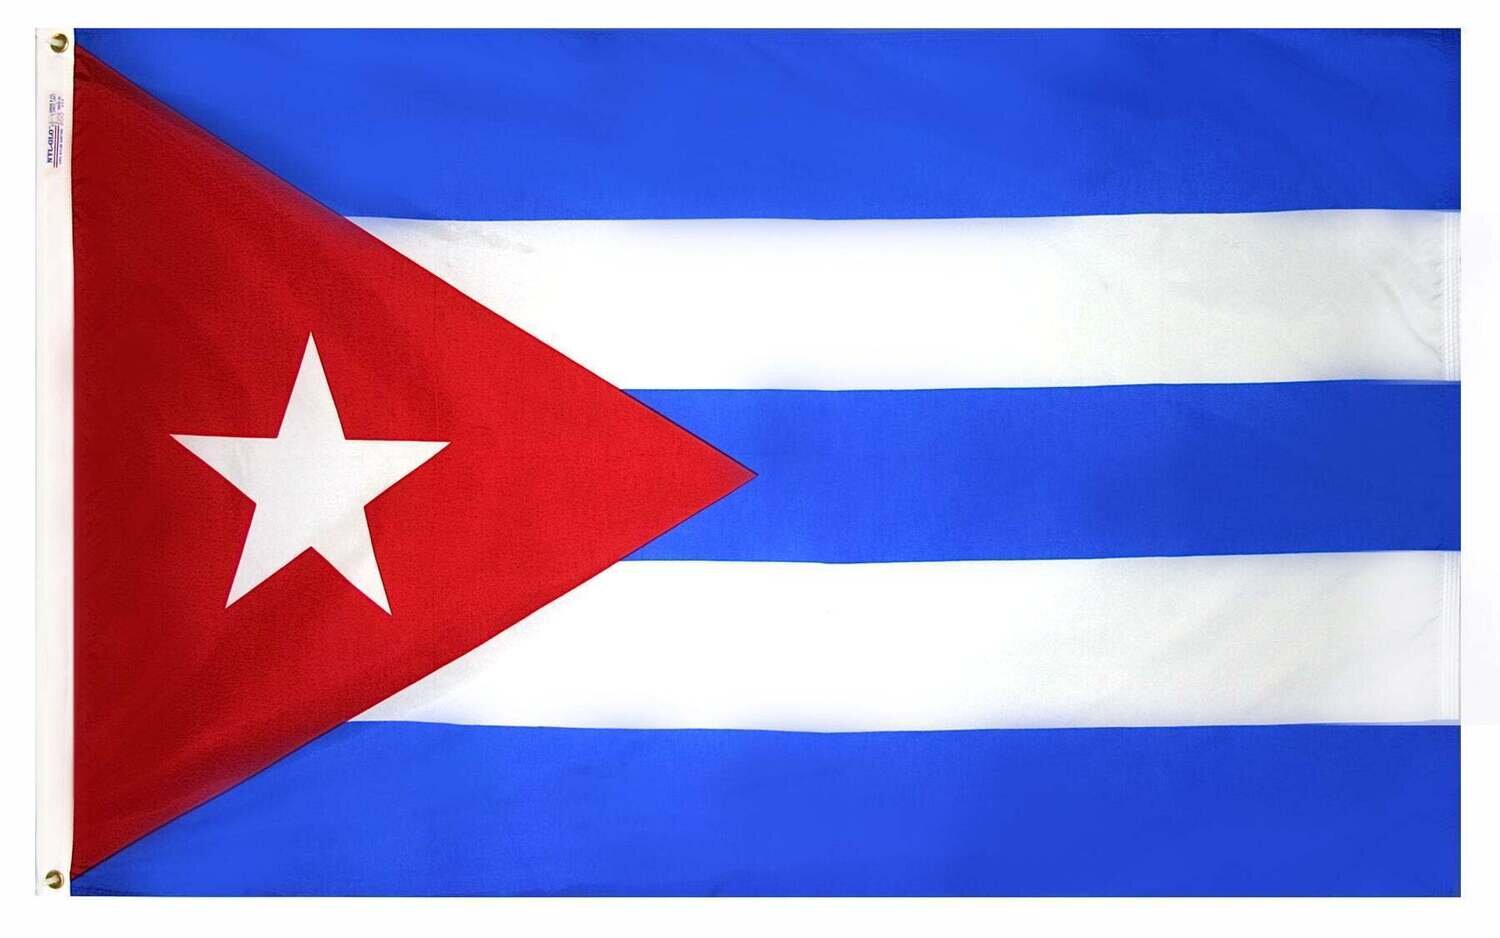 Cuba Flag 2x3 ft. Nylon SolarGuard Nyl-Glo 100% Made in USA to Official United Nations Design Specifications.